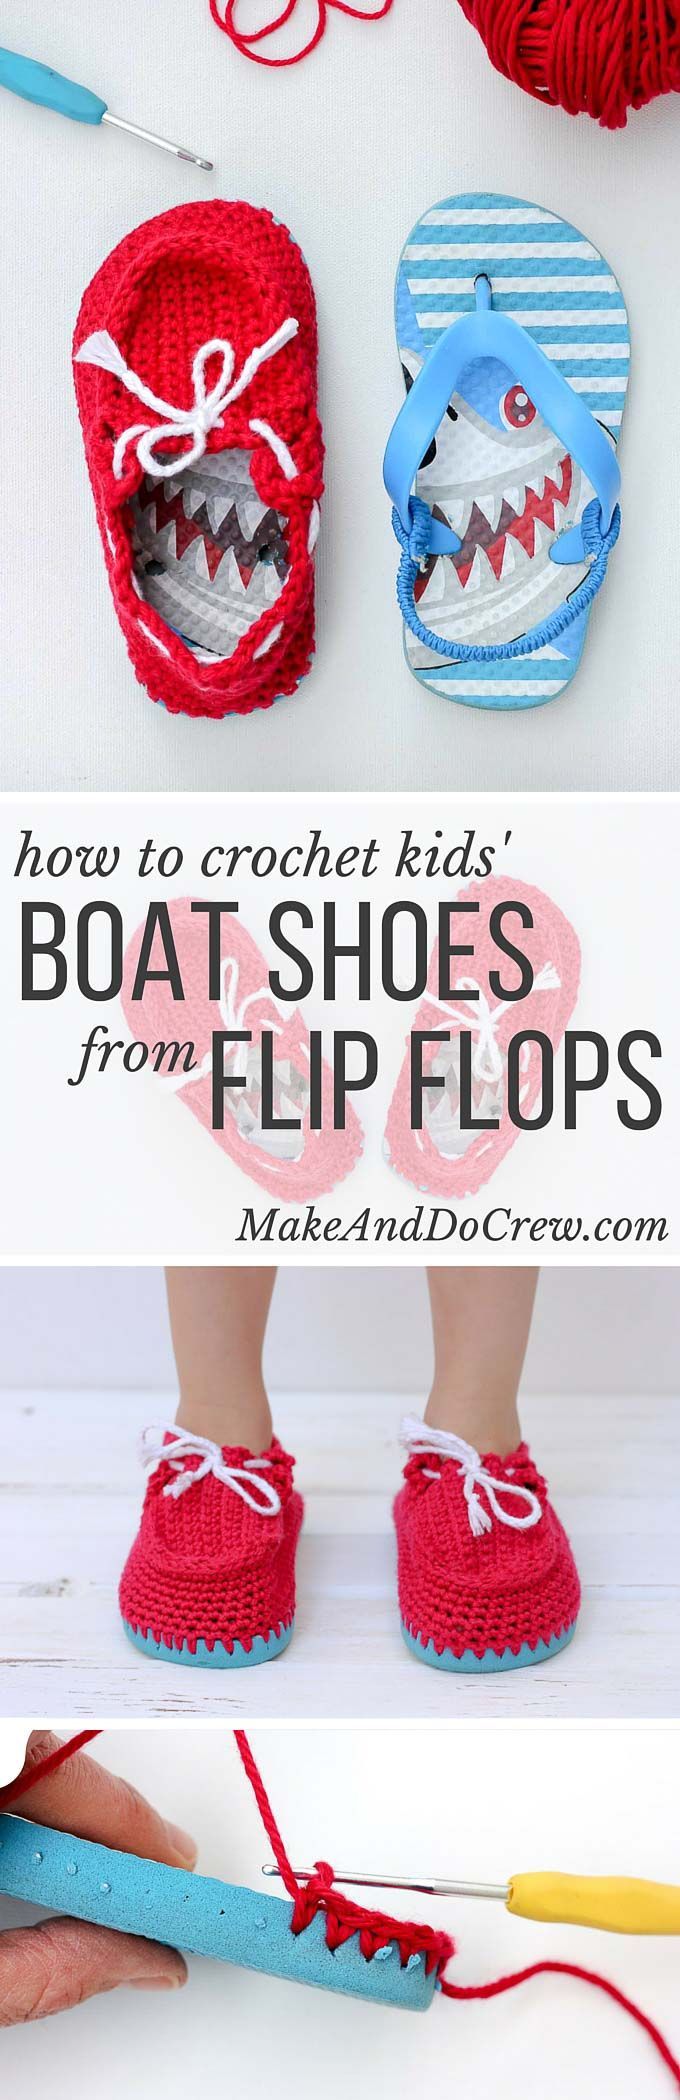 Crochet toddler “boat shoe” slippers with flip flop soles - free pattern!